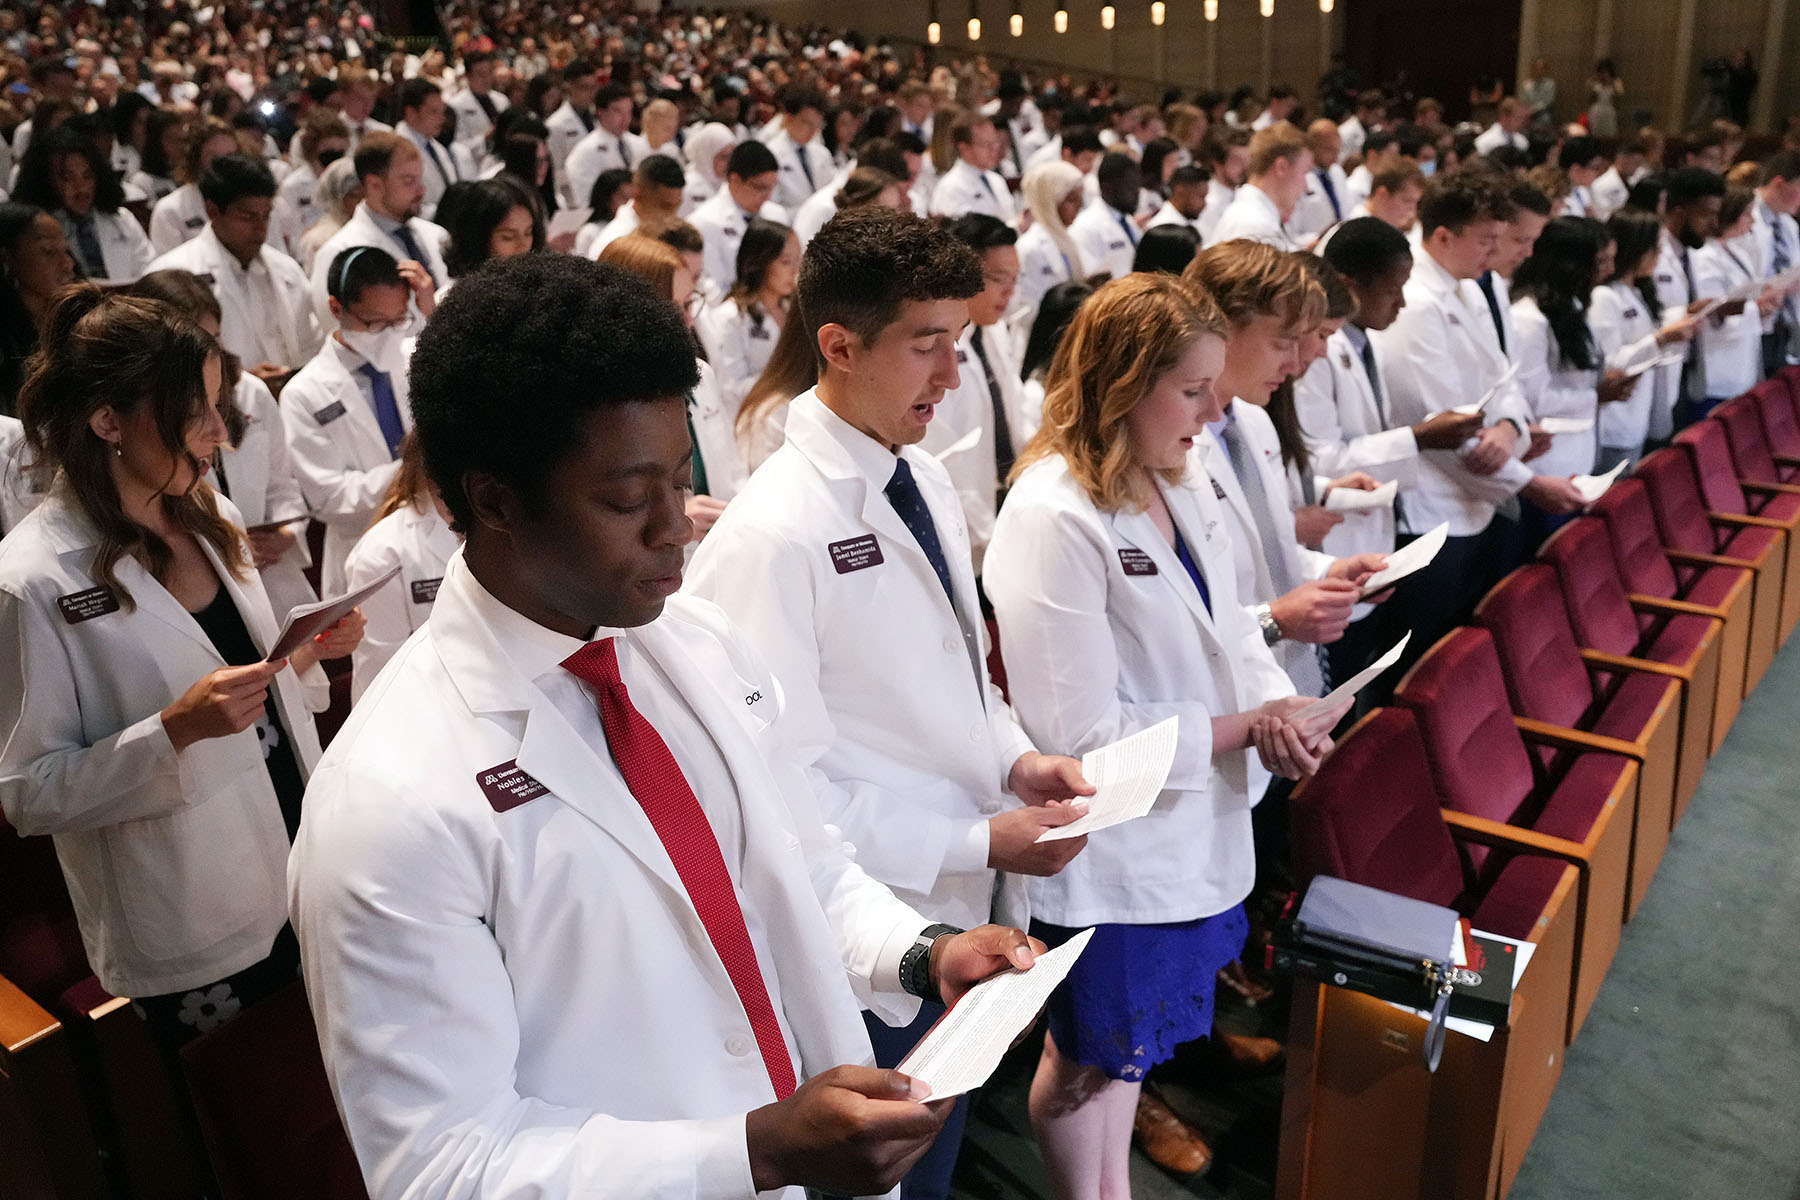 Medical students wearing white coats are seen reading from a paper as they recite an oath in an auditorium.